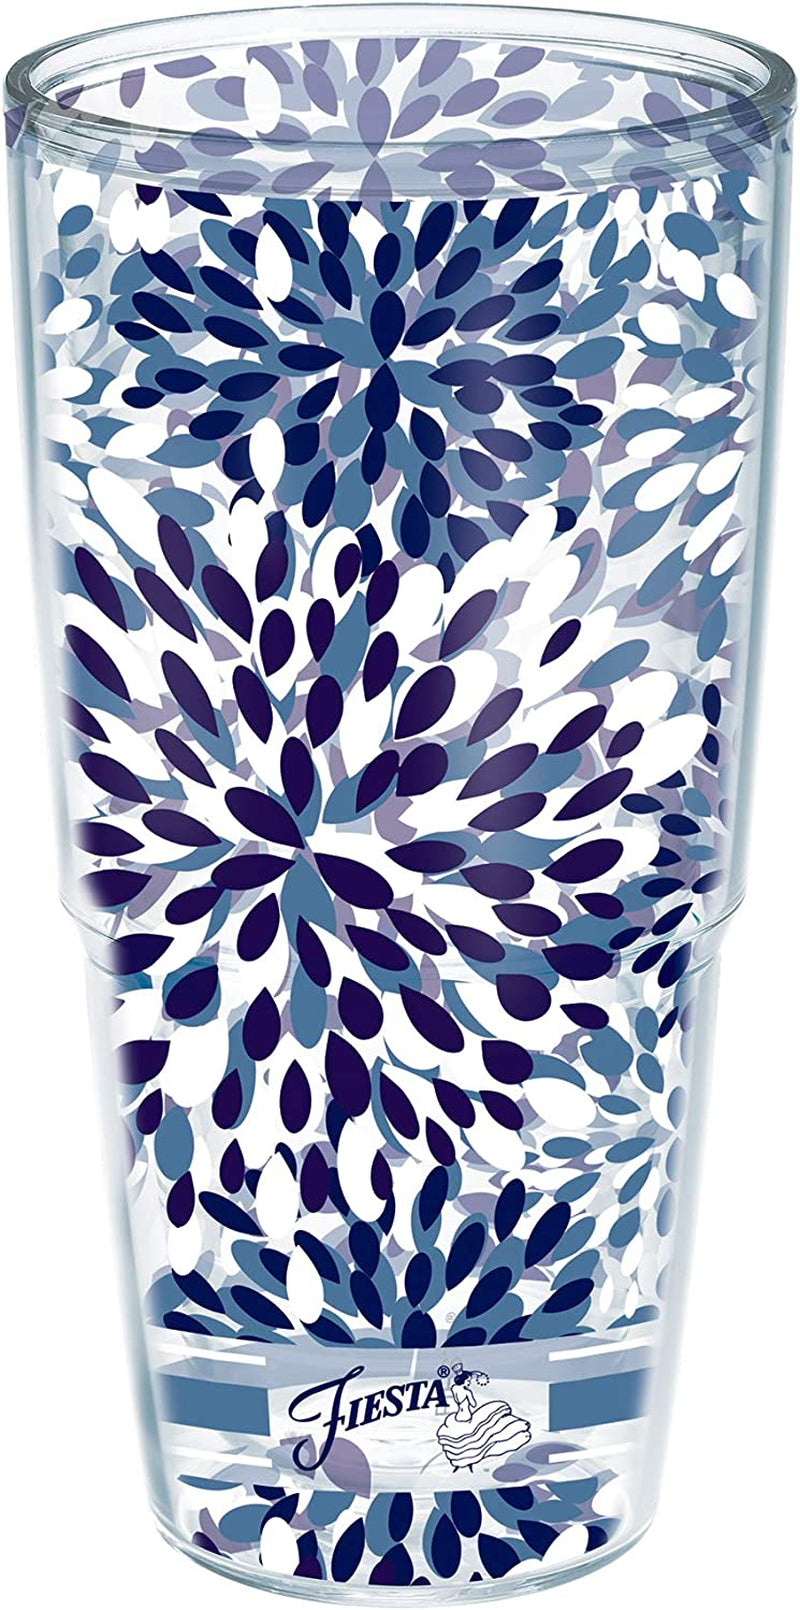 Tervis Made in USA Double Walled Fiesta Insulated Tumbler Cup Keeps Drinks Cold & Hot, 16Oz - 2Pk, Lapis Calypso Home & Garden > Kitchen & Dining > Tableware > Drinkware Tervis Tumbler Company Unlidded 24oz 